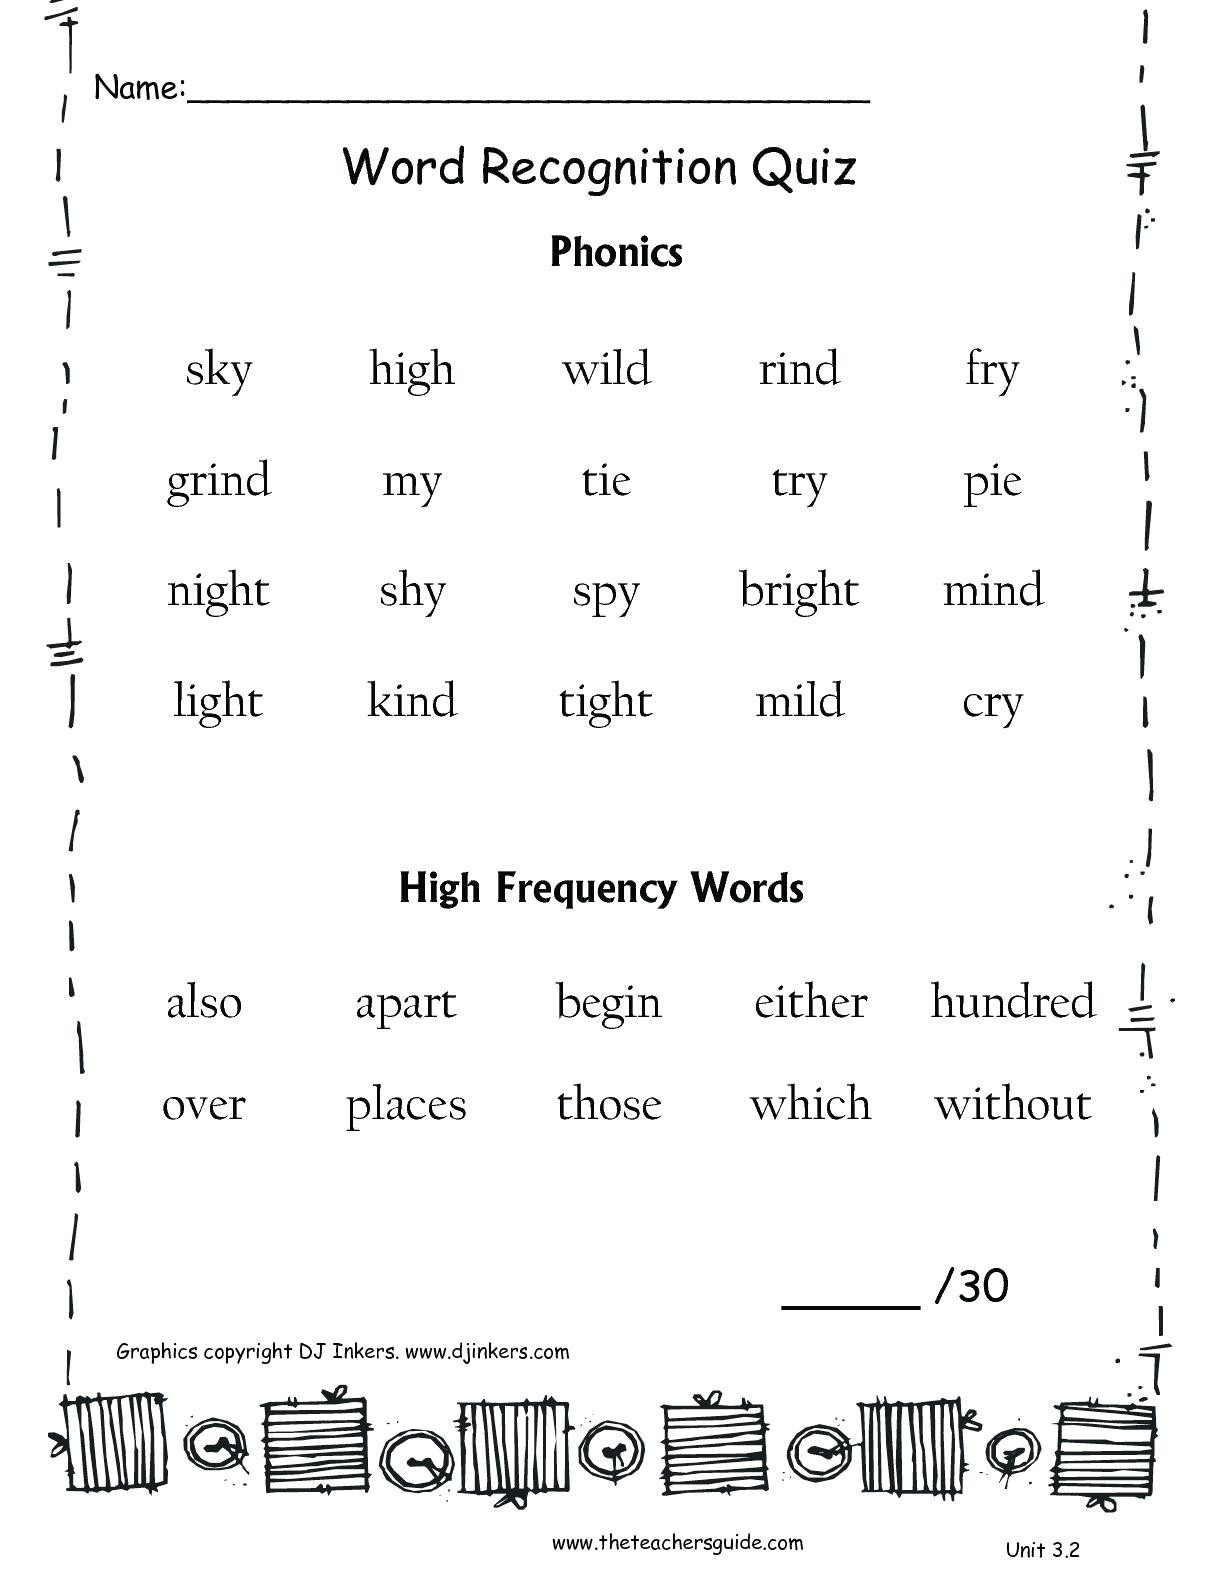 Free Math Worksheets Second Grade 2 Subtraction Subtracting 1 Digit From 2 Digit Missing Number